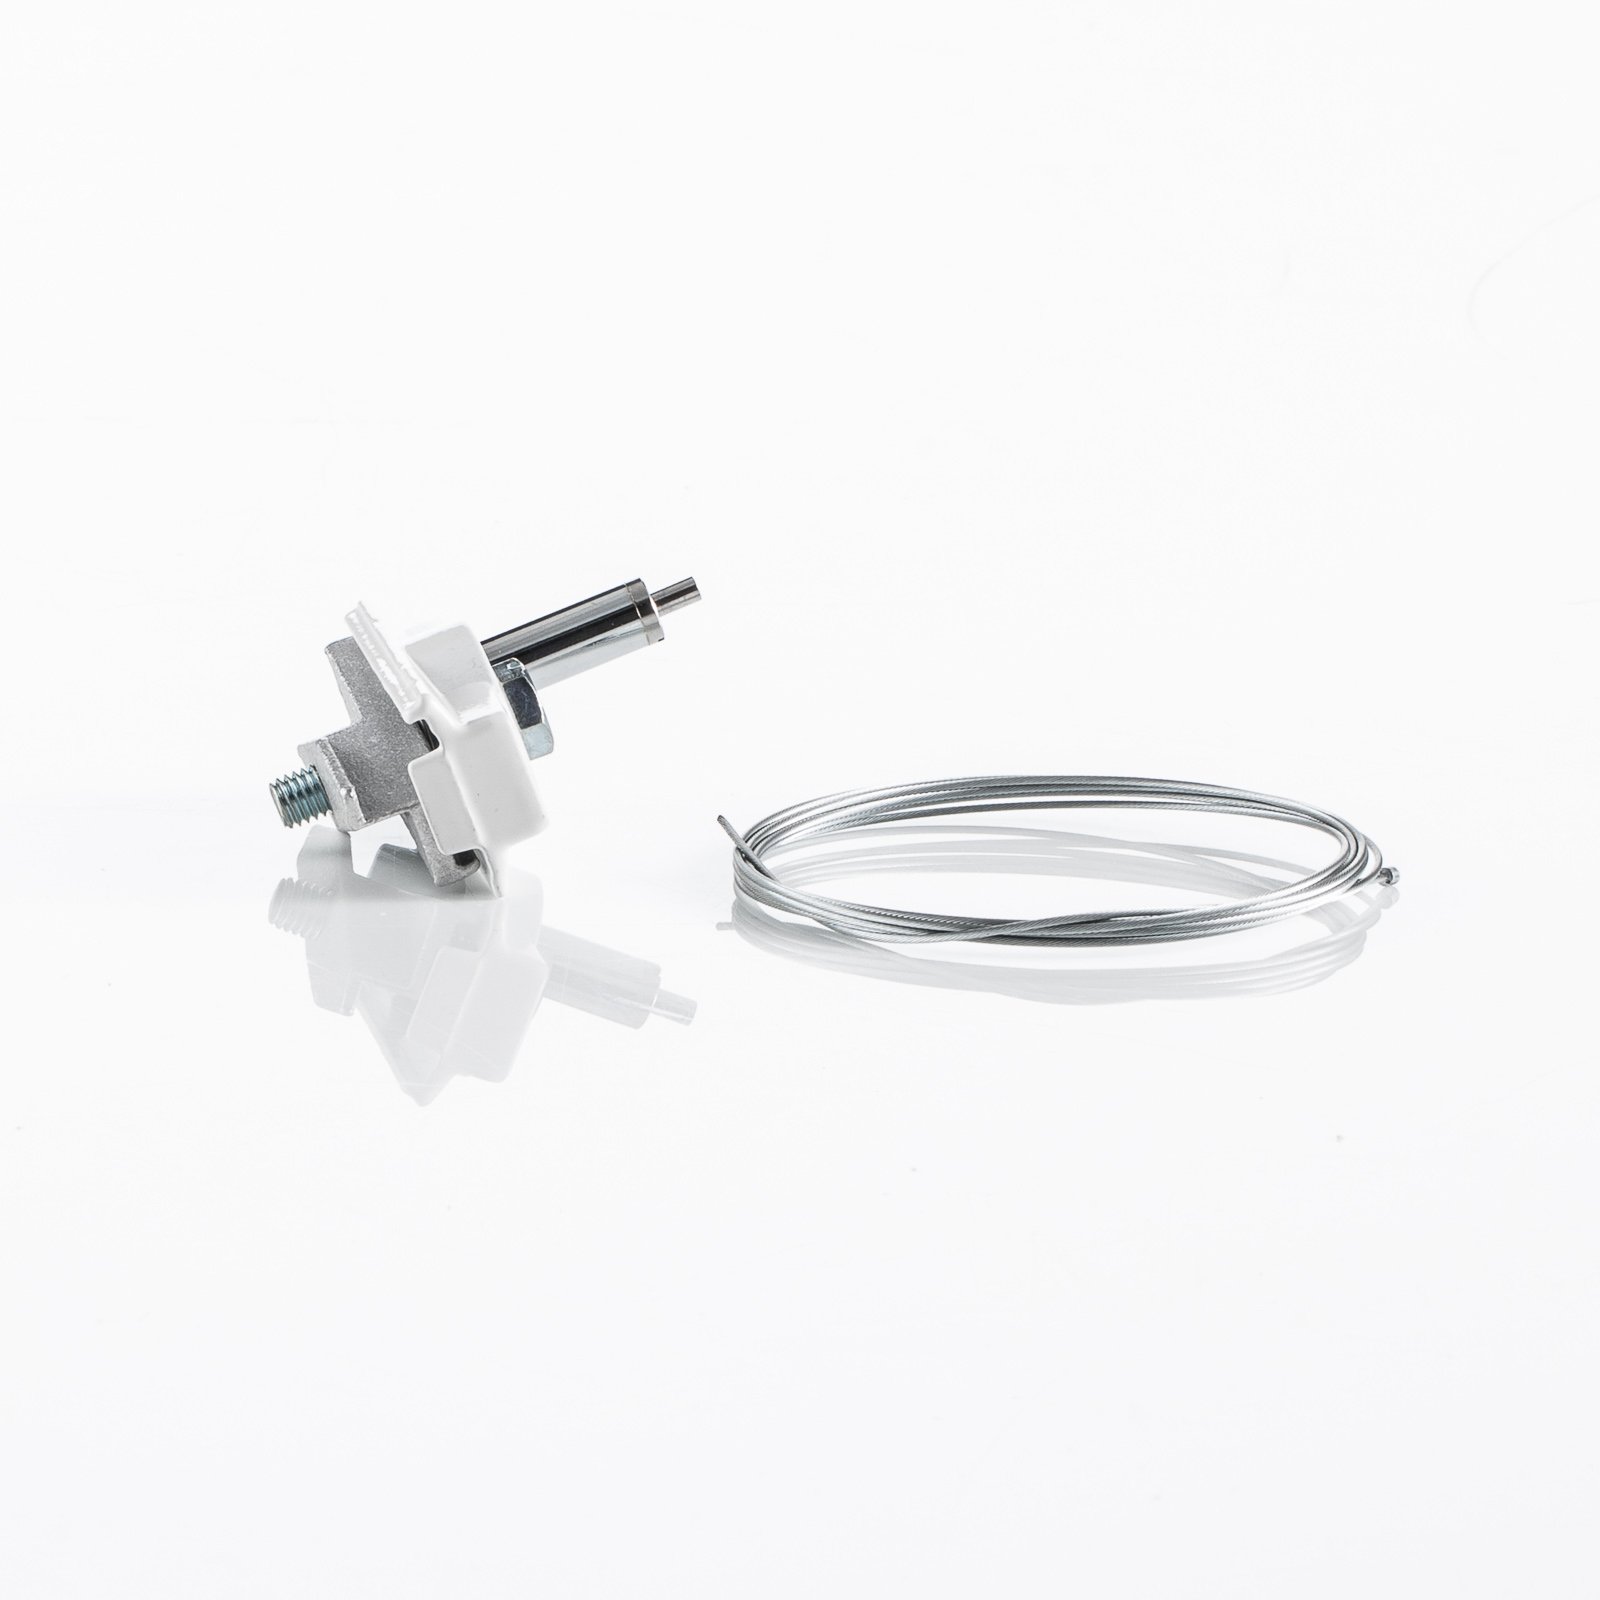 Ivela adapter mechanical, quick release, white